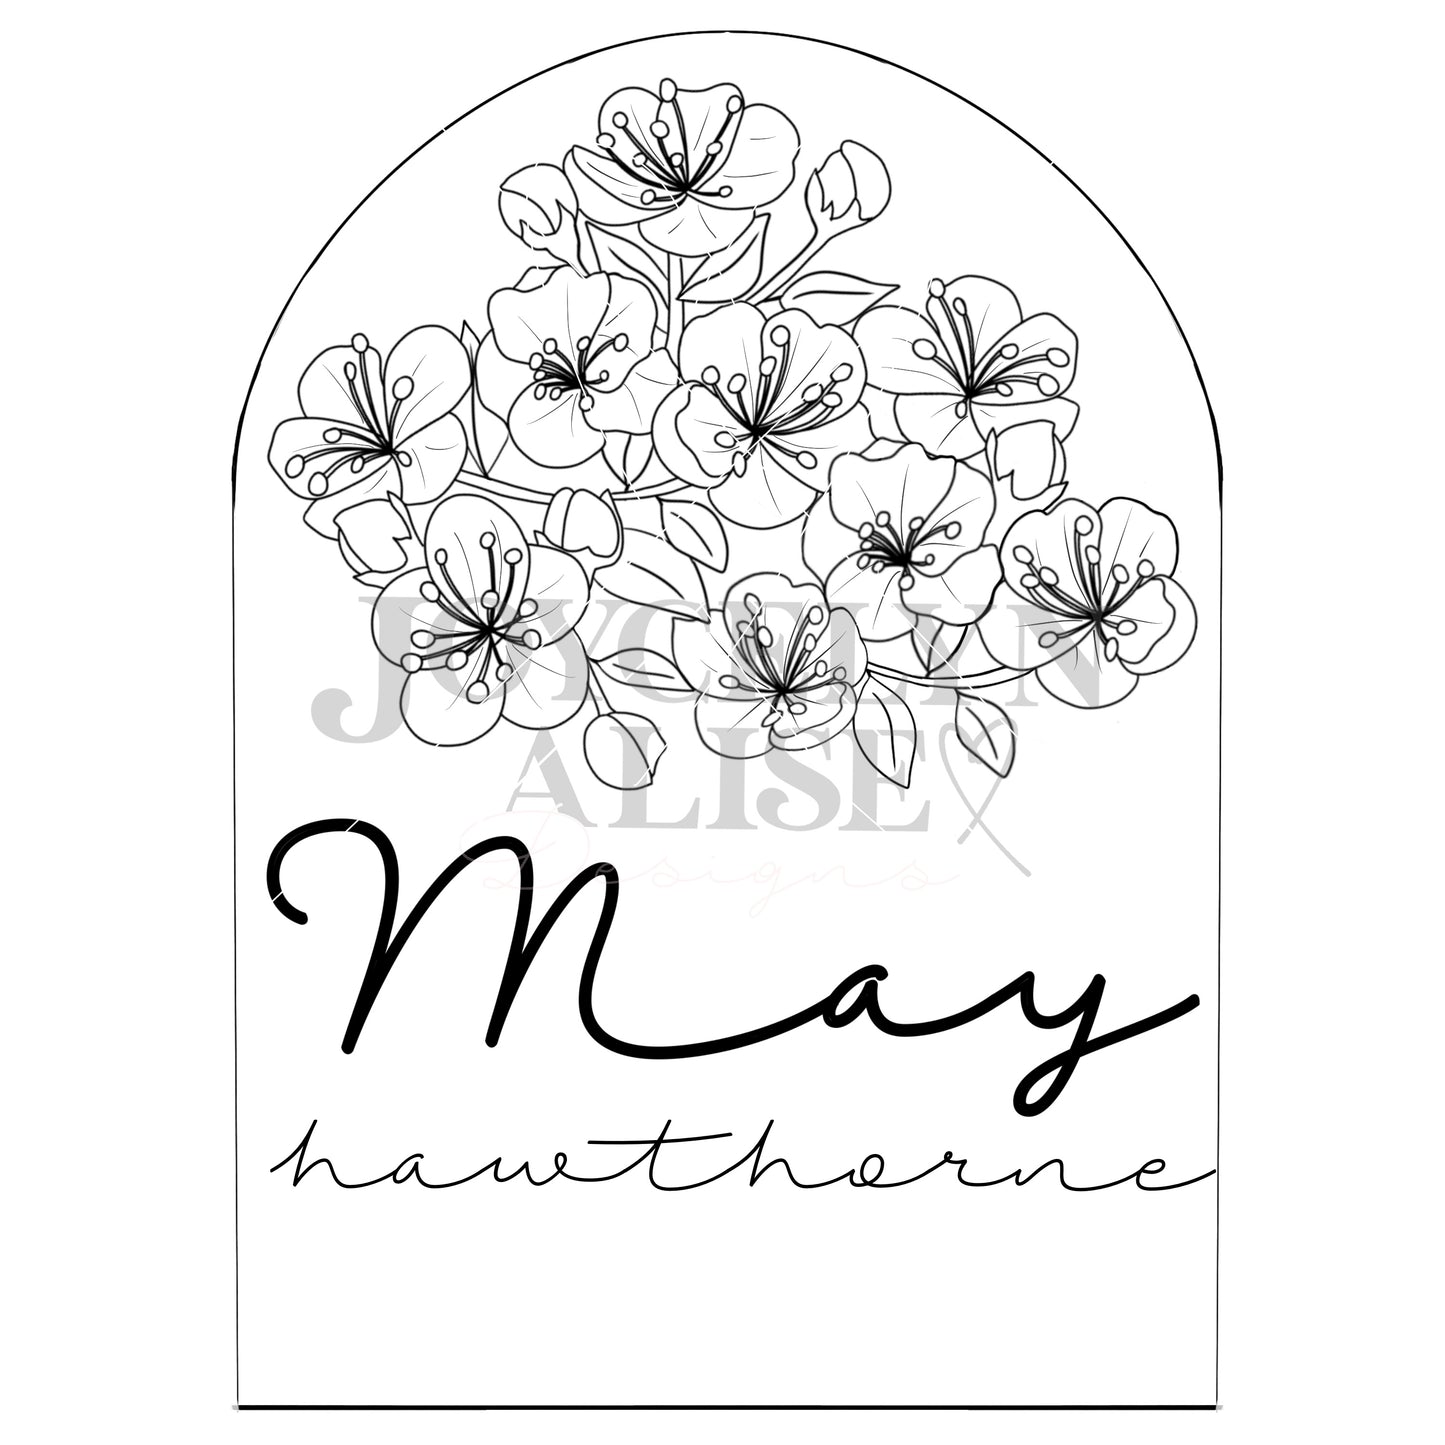 May hawthorne scroll saw template